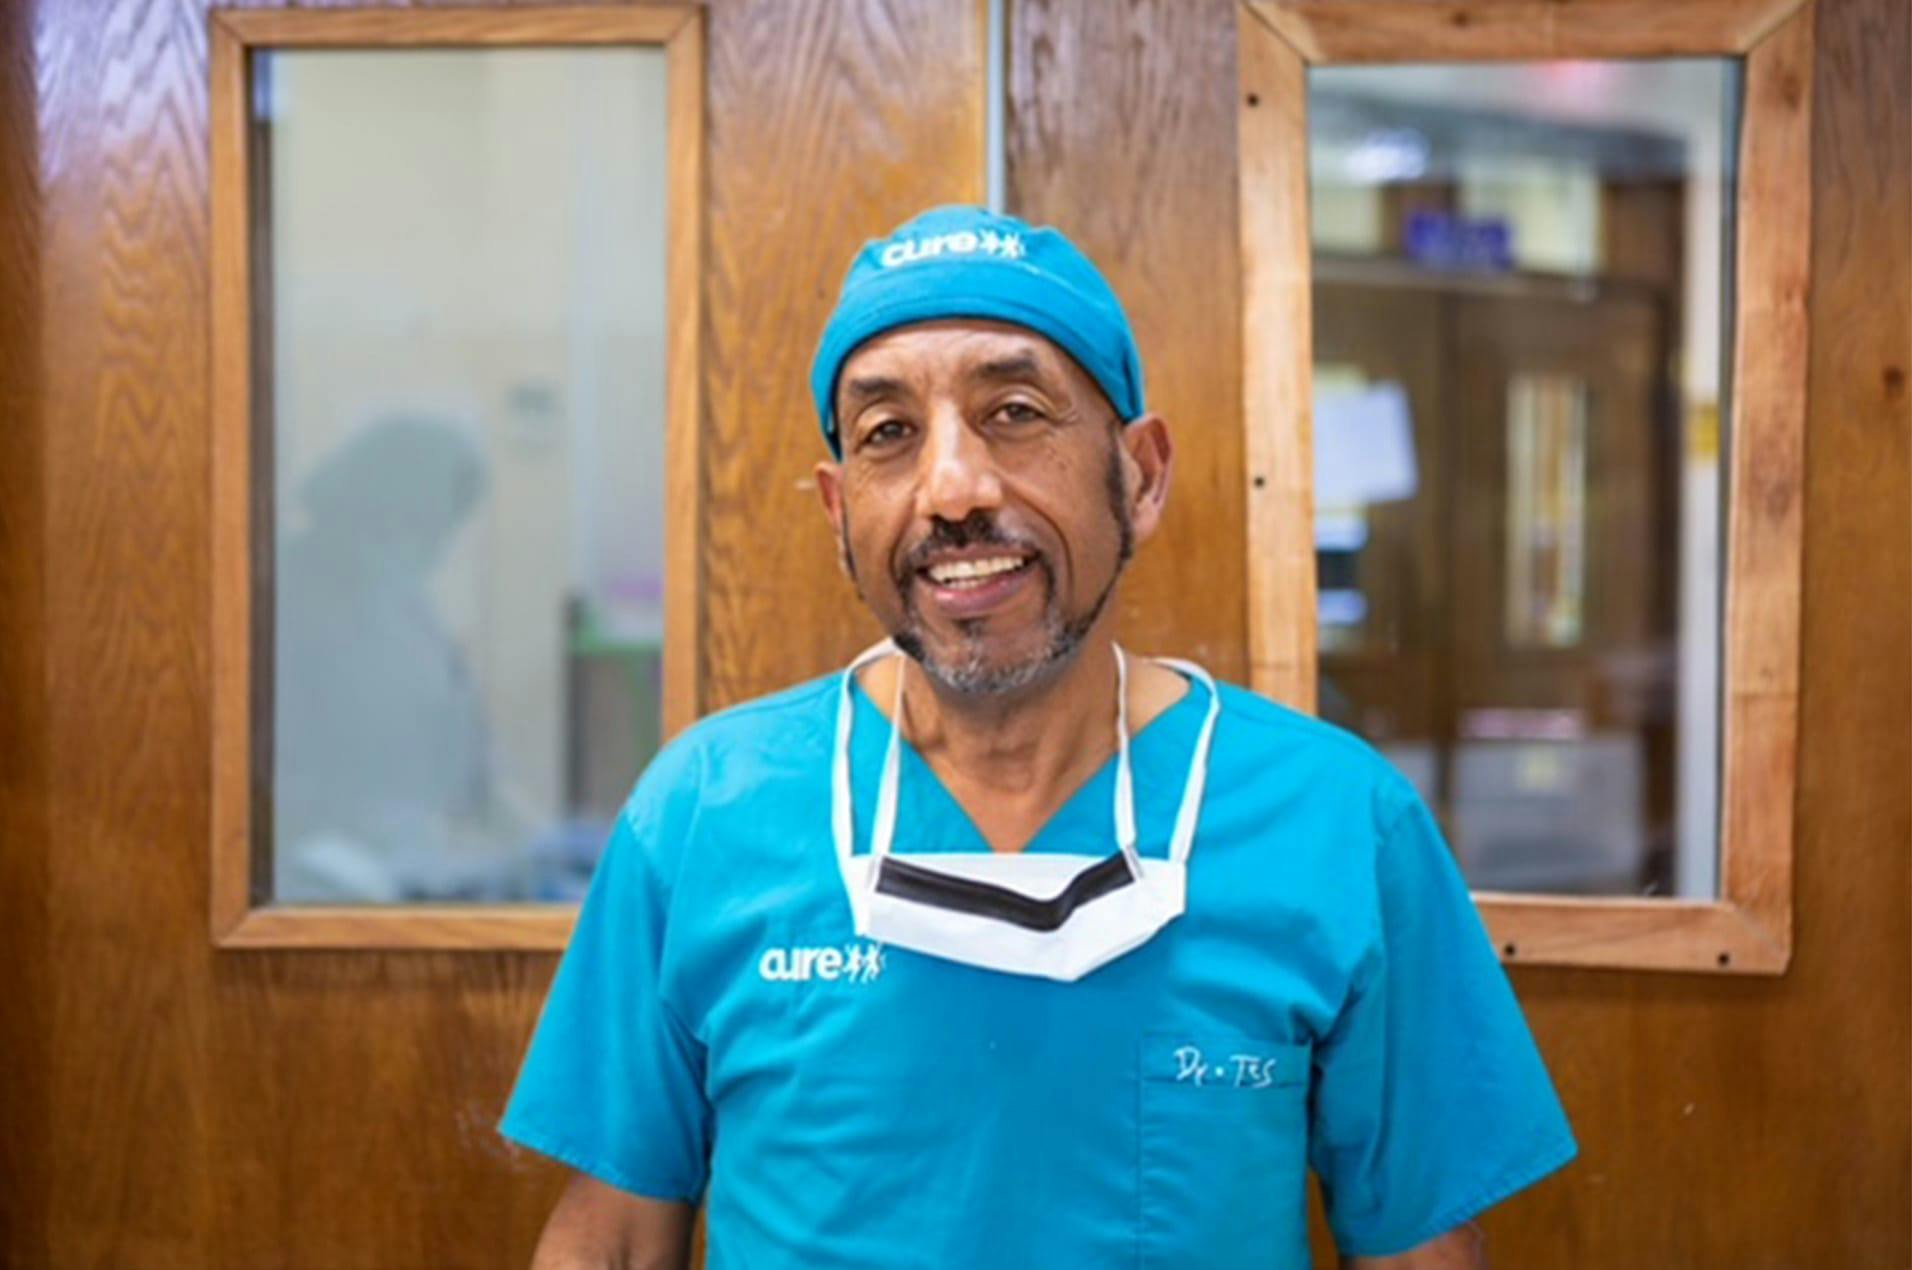 dr tesfate mulat smiling in medical attire